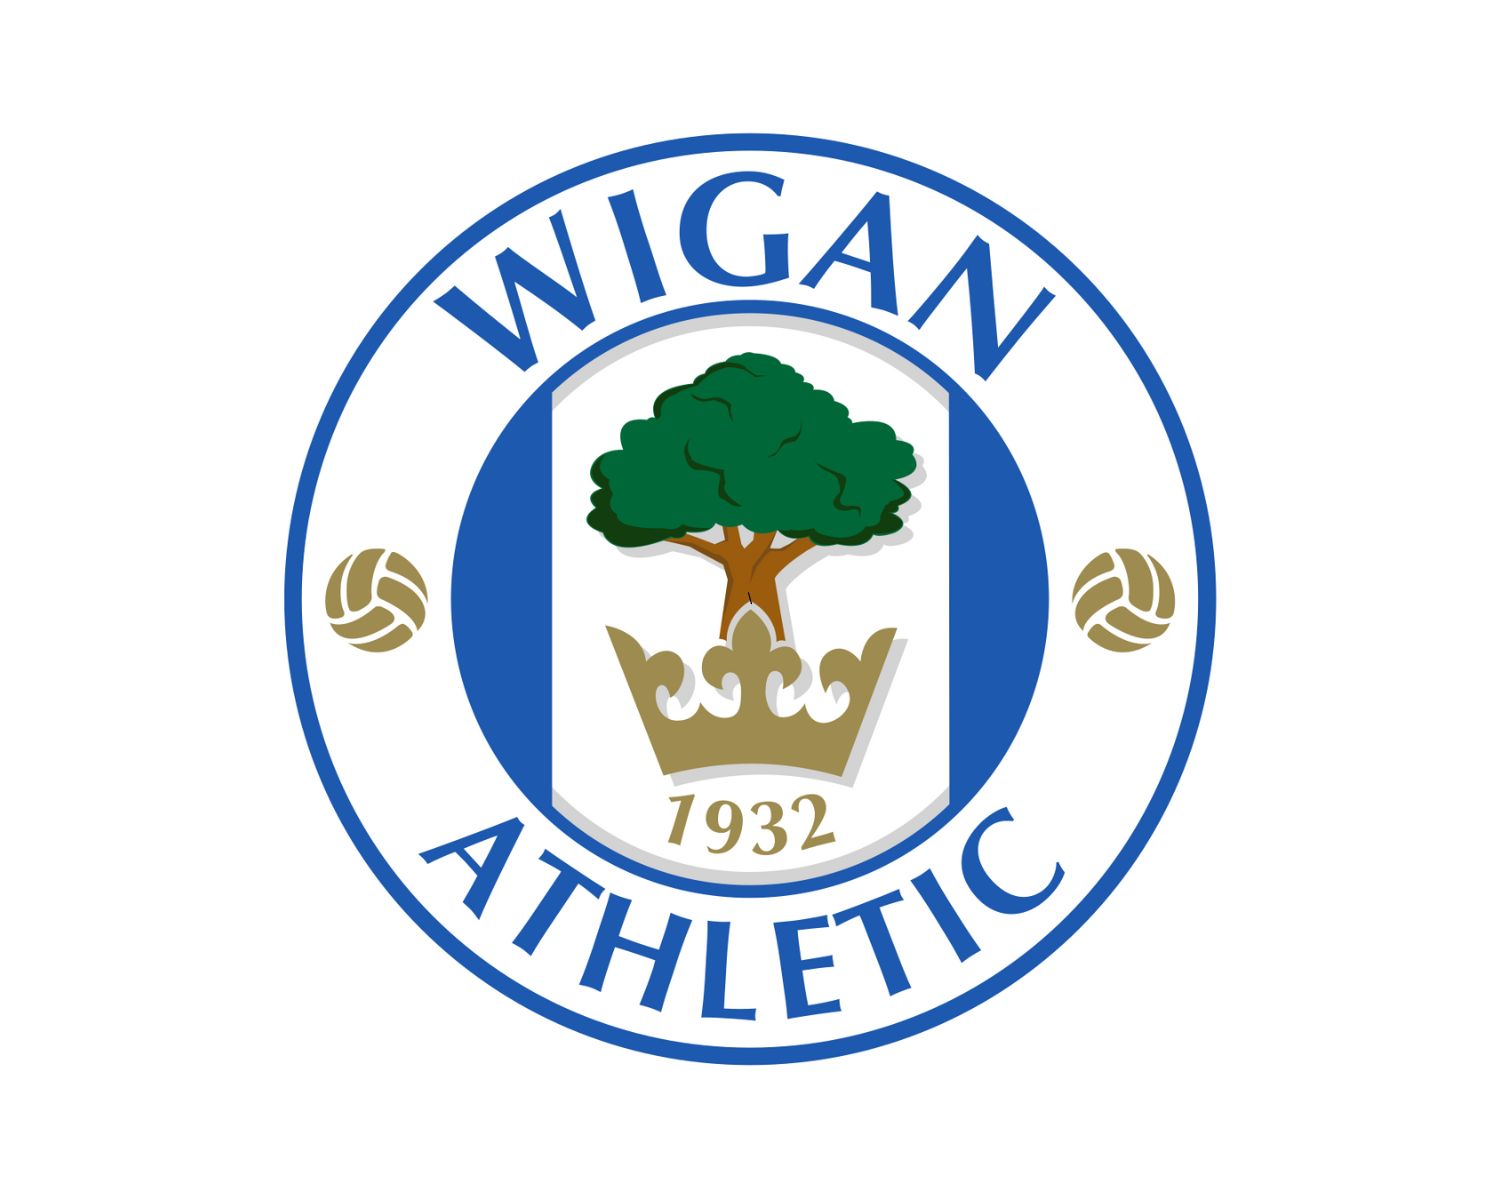 Wigan Athletic FC: 11 Football Club Facts - Facts.net